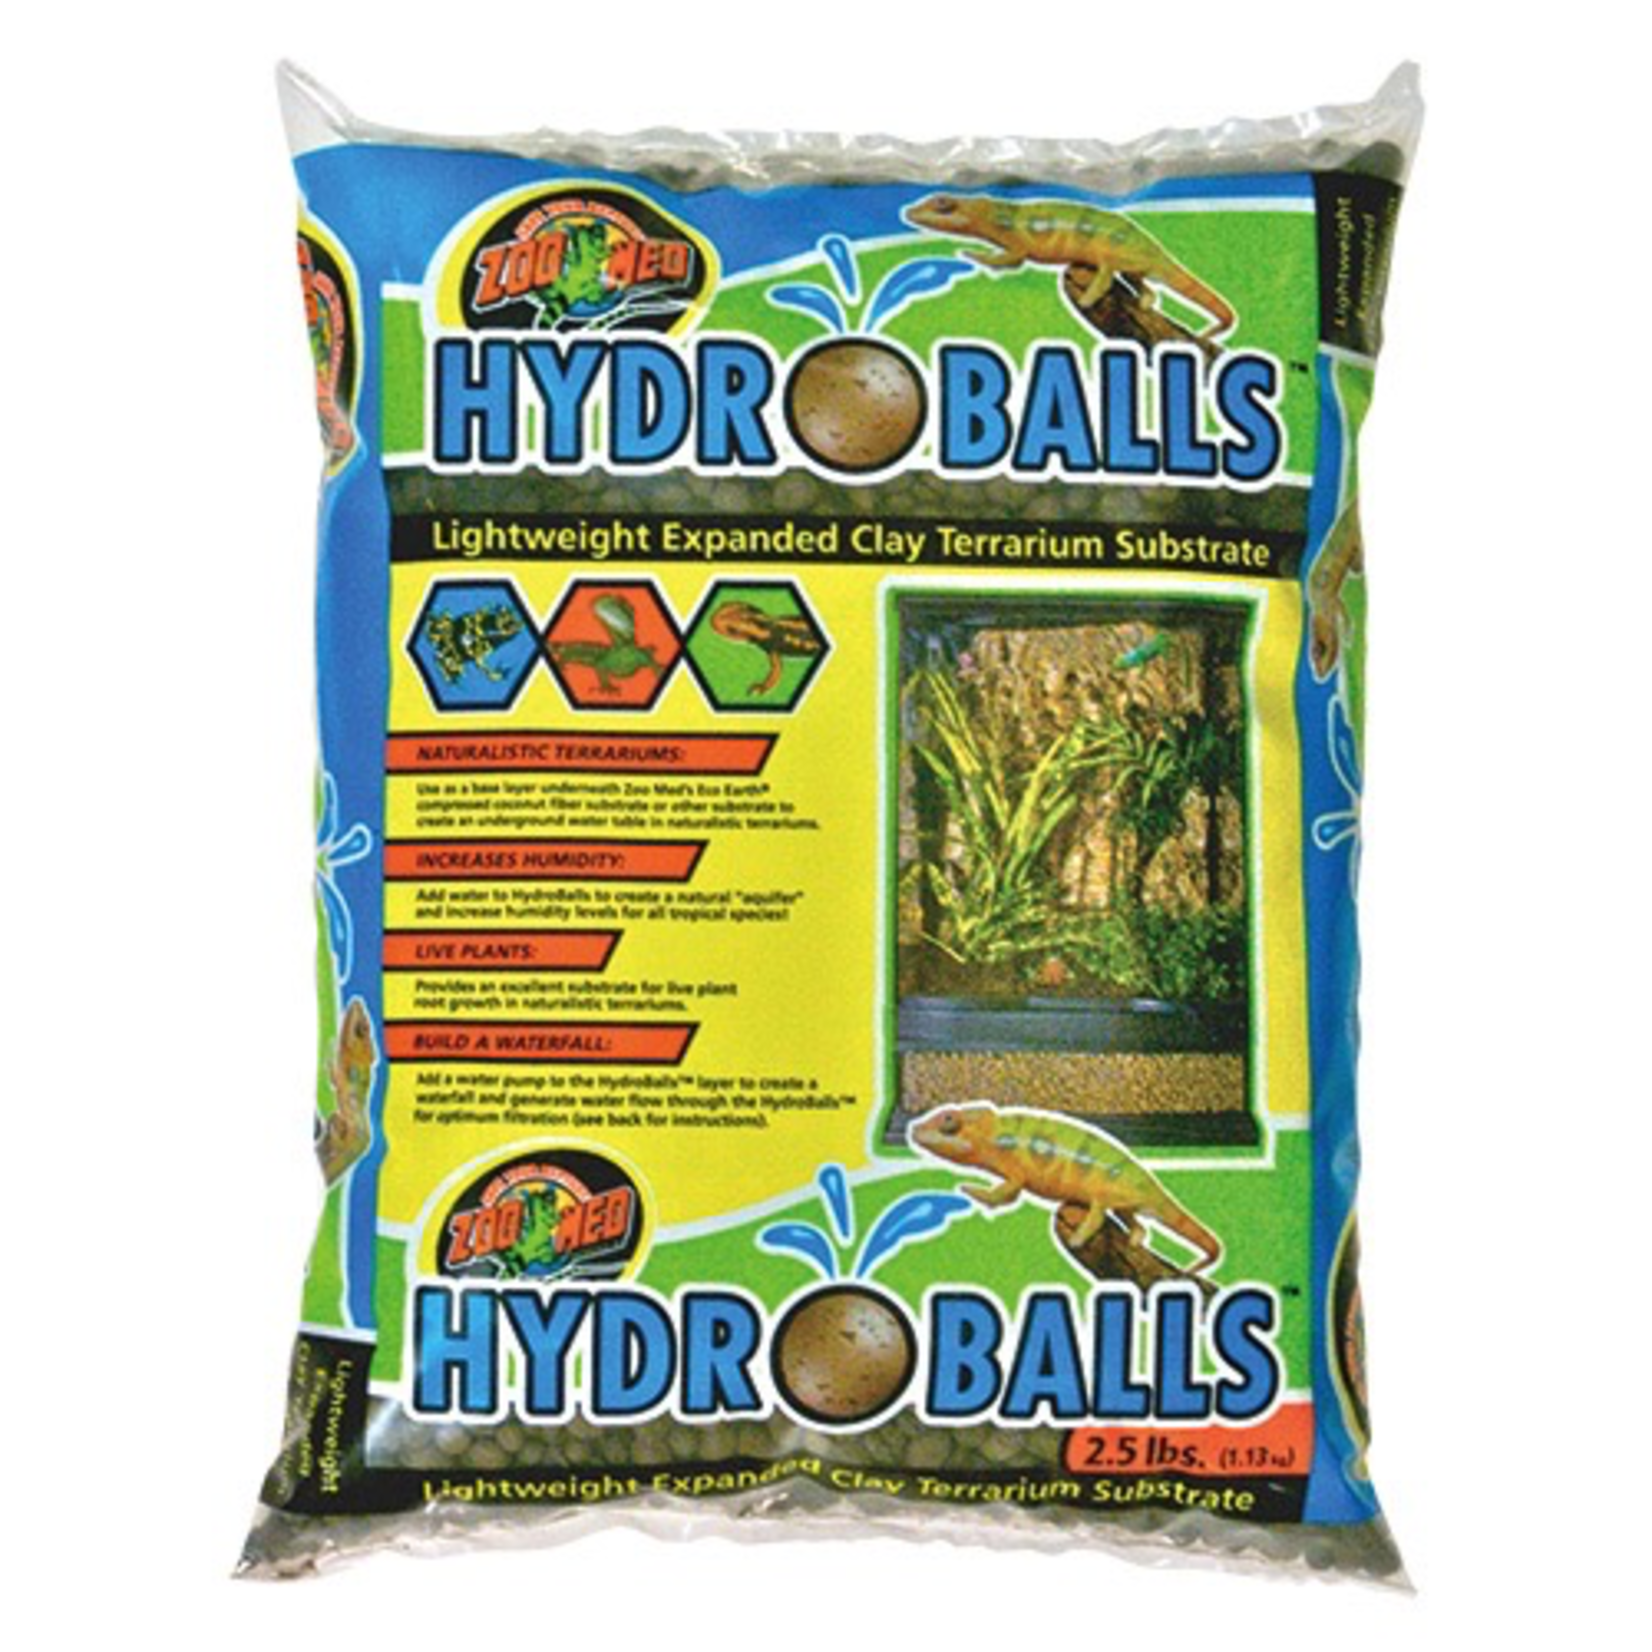 HydroBalls Lightweight Expanded Clay Terrarium Substrate - 2.5 lb